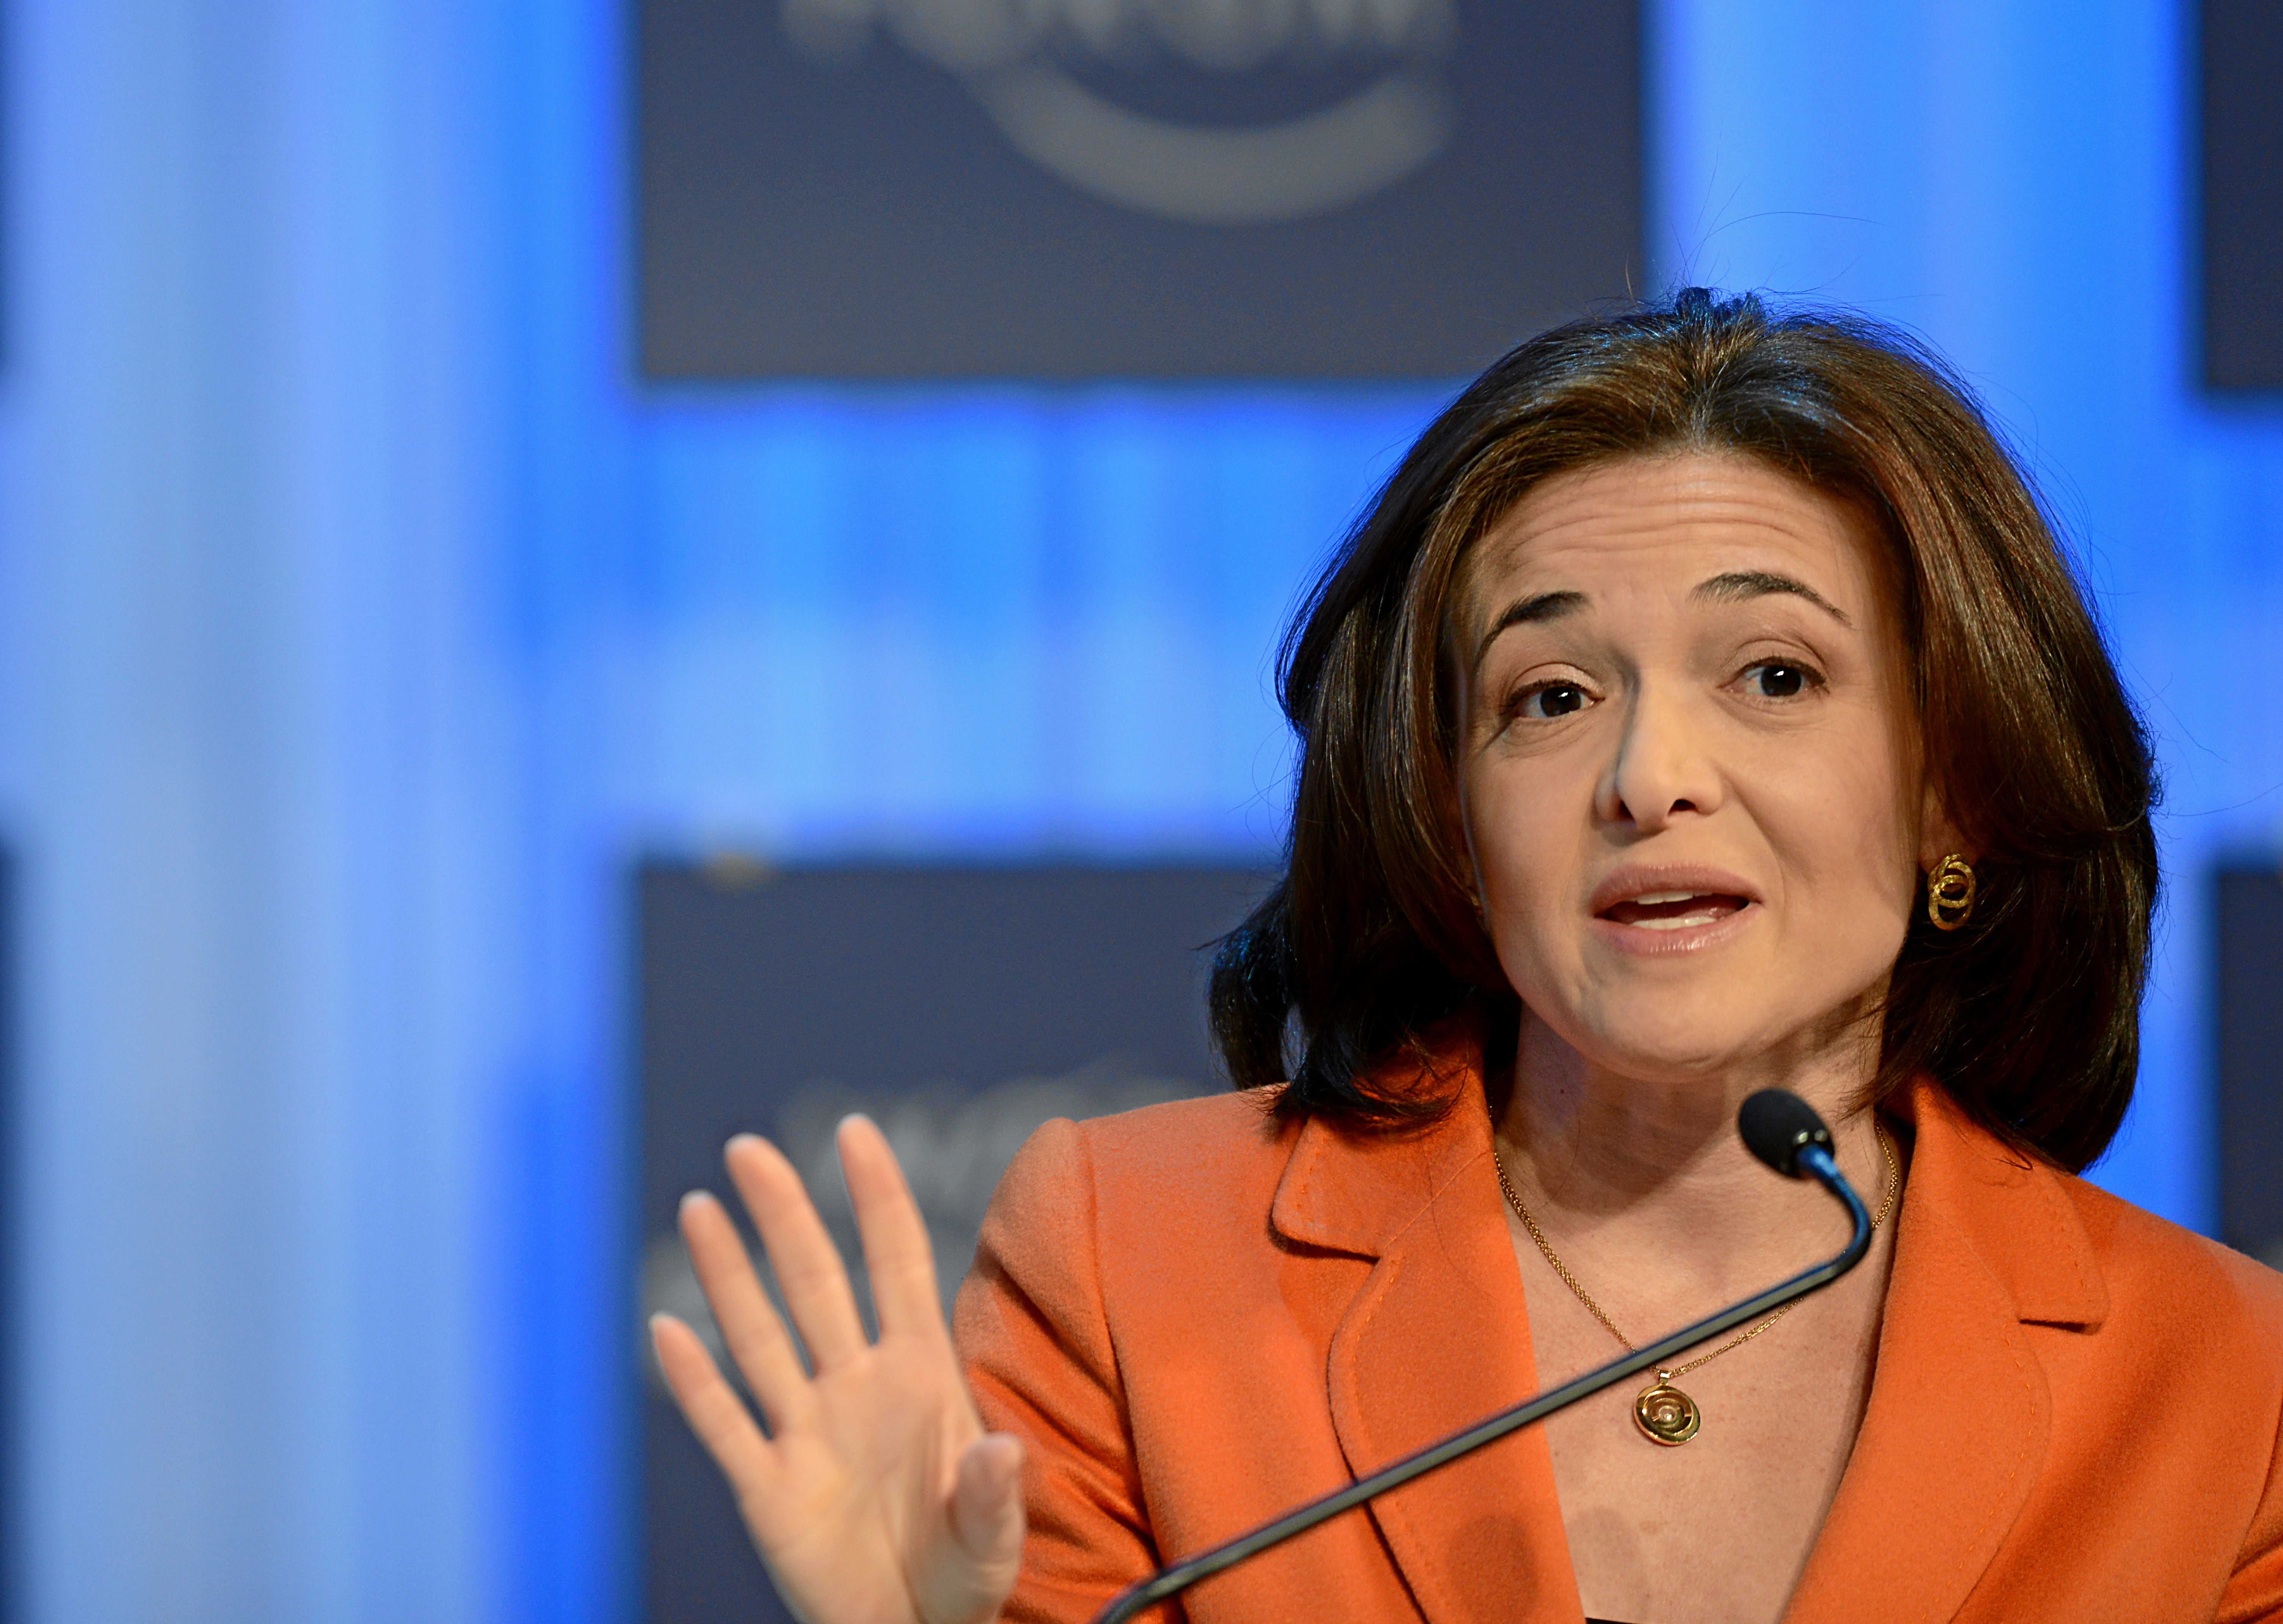 Facebook COO Sheryl Sandberg Is Leaving The Company After 14 Years: What Investors Need To Know